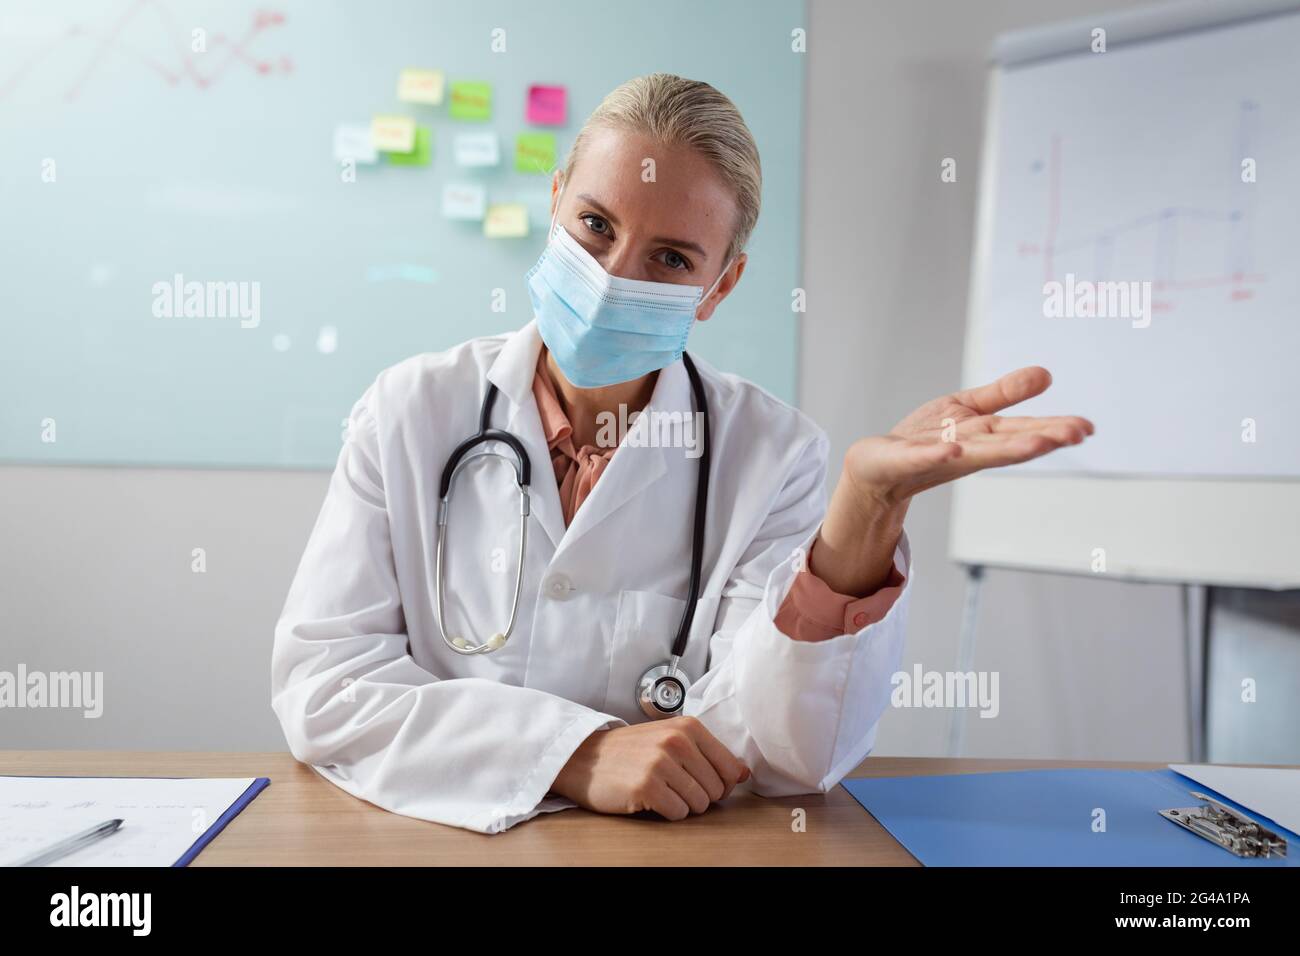 Caucasian female doctor wearing face mask sitting at desk in office gesturing during video call Stock Photo